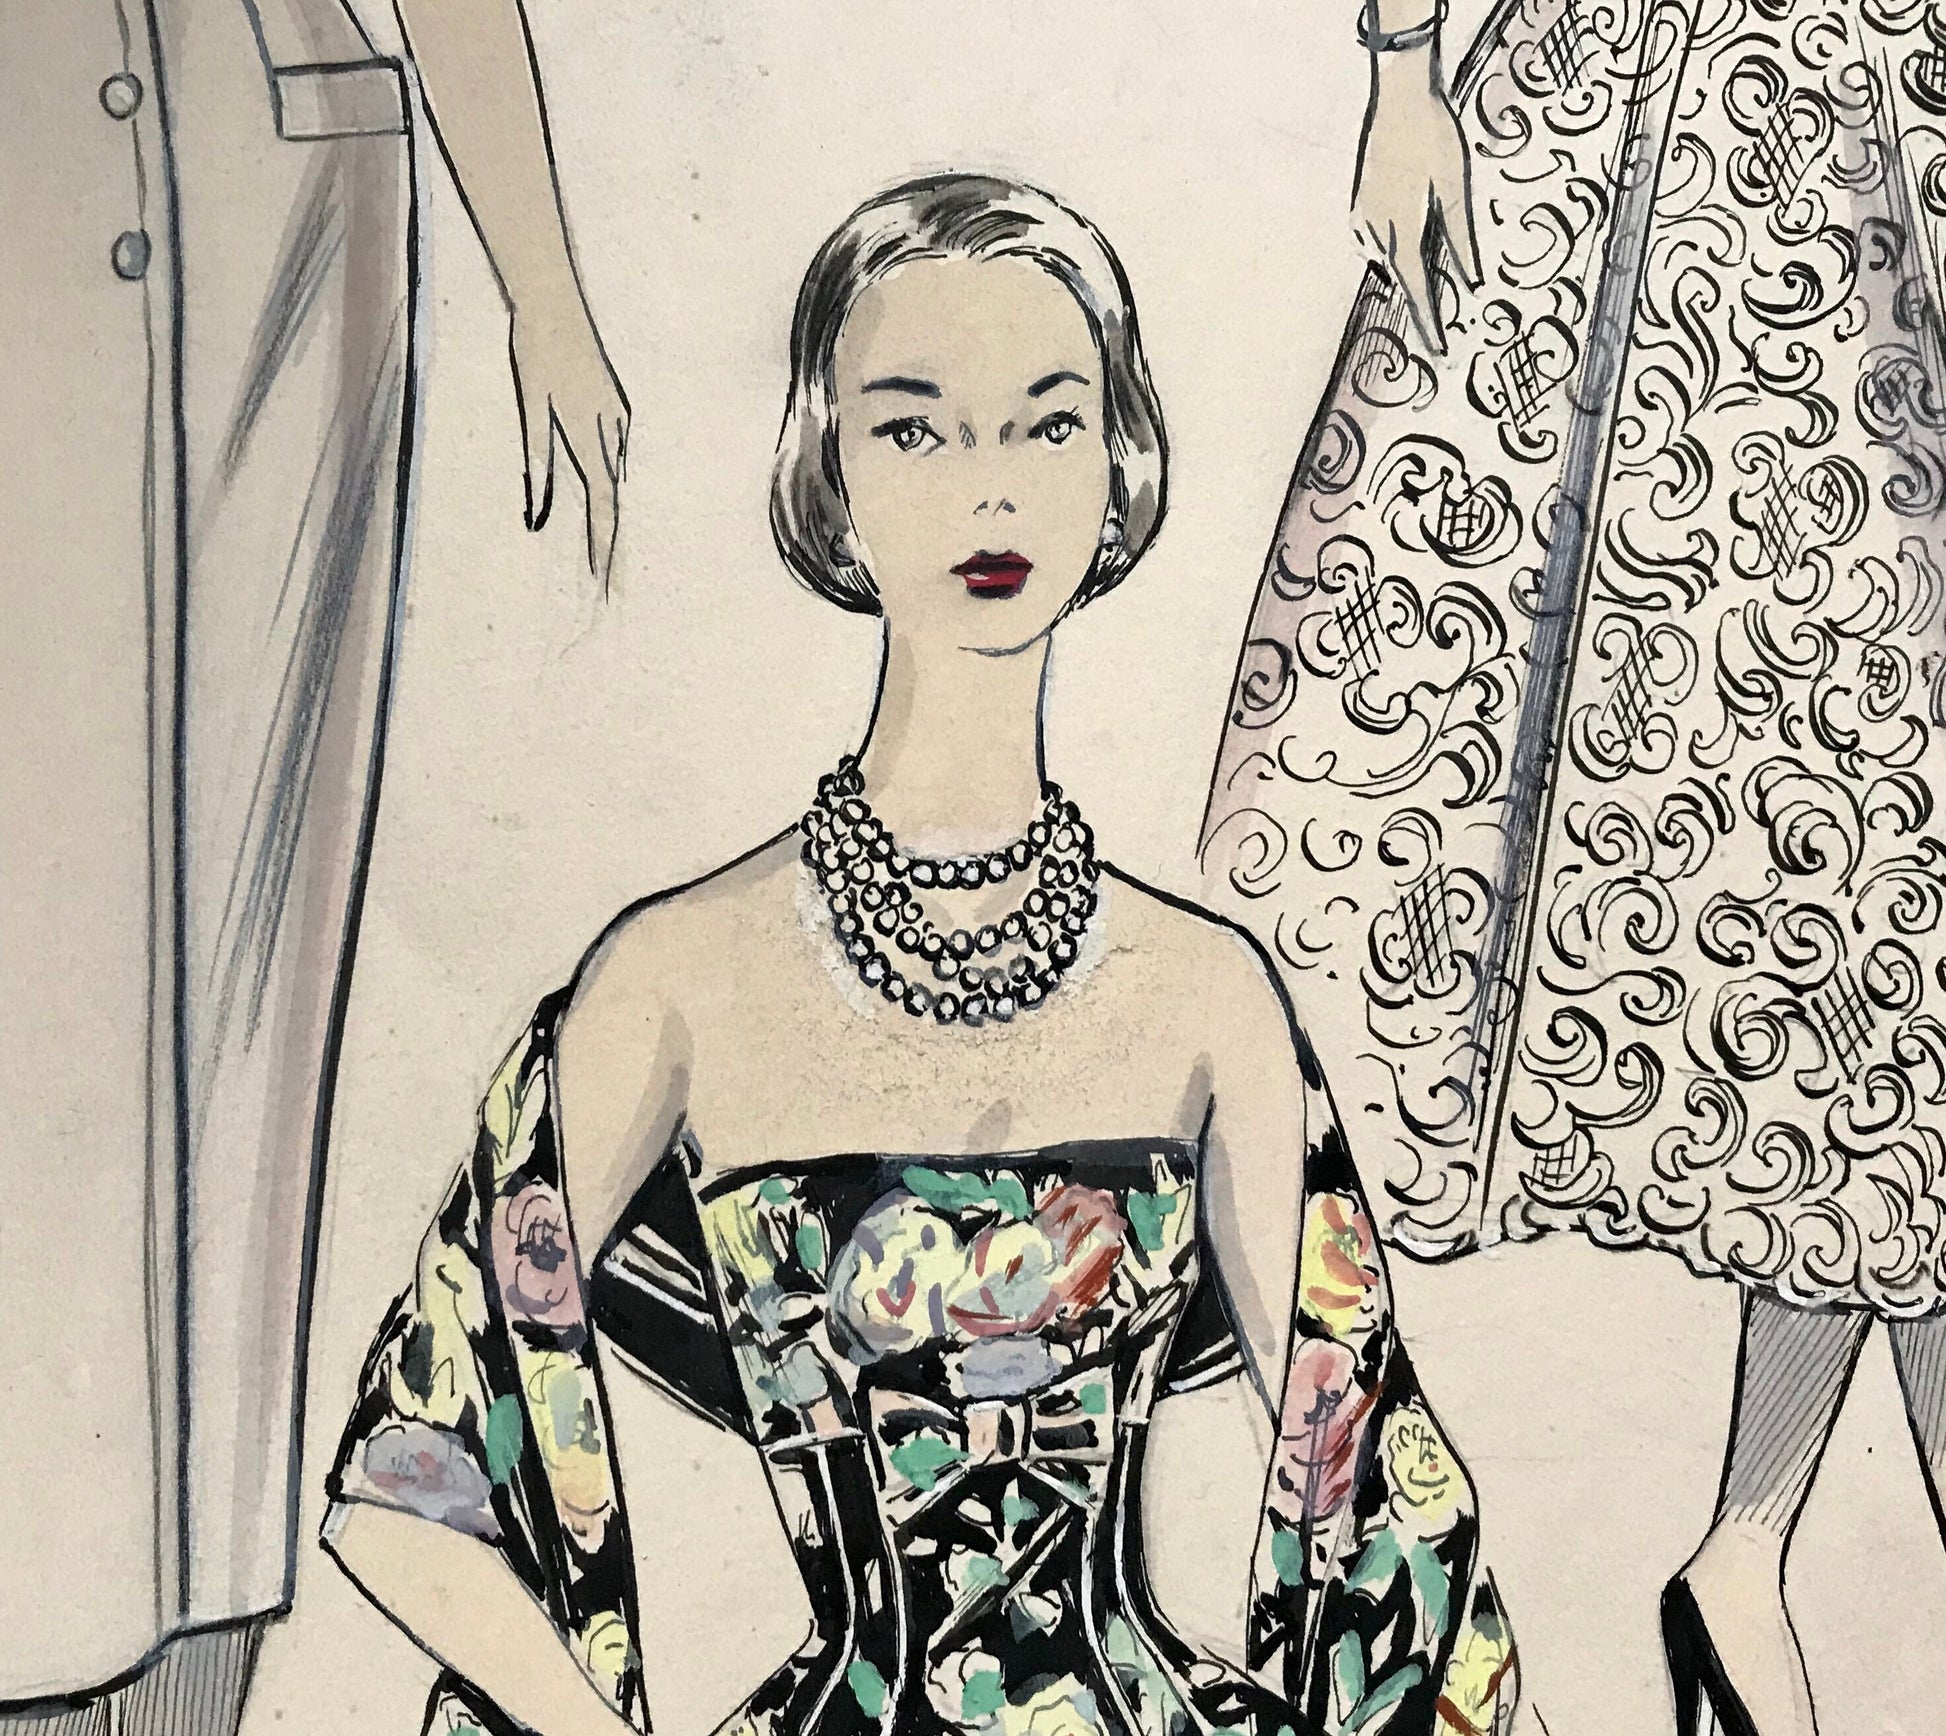 A Large Hand Drawn and Hand Painted Fashion Illustration. Spanish. From Barcelona. 1957 - 58. Size: 52 x 41.5 cms.